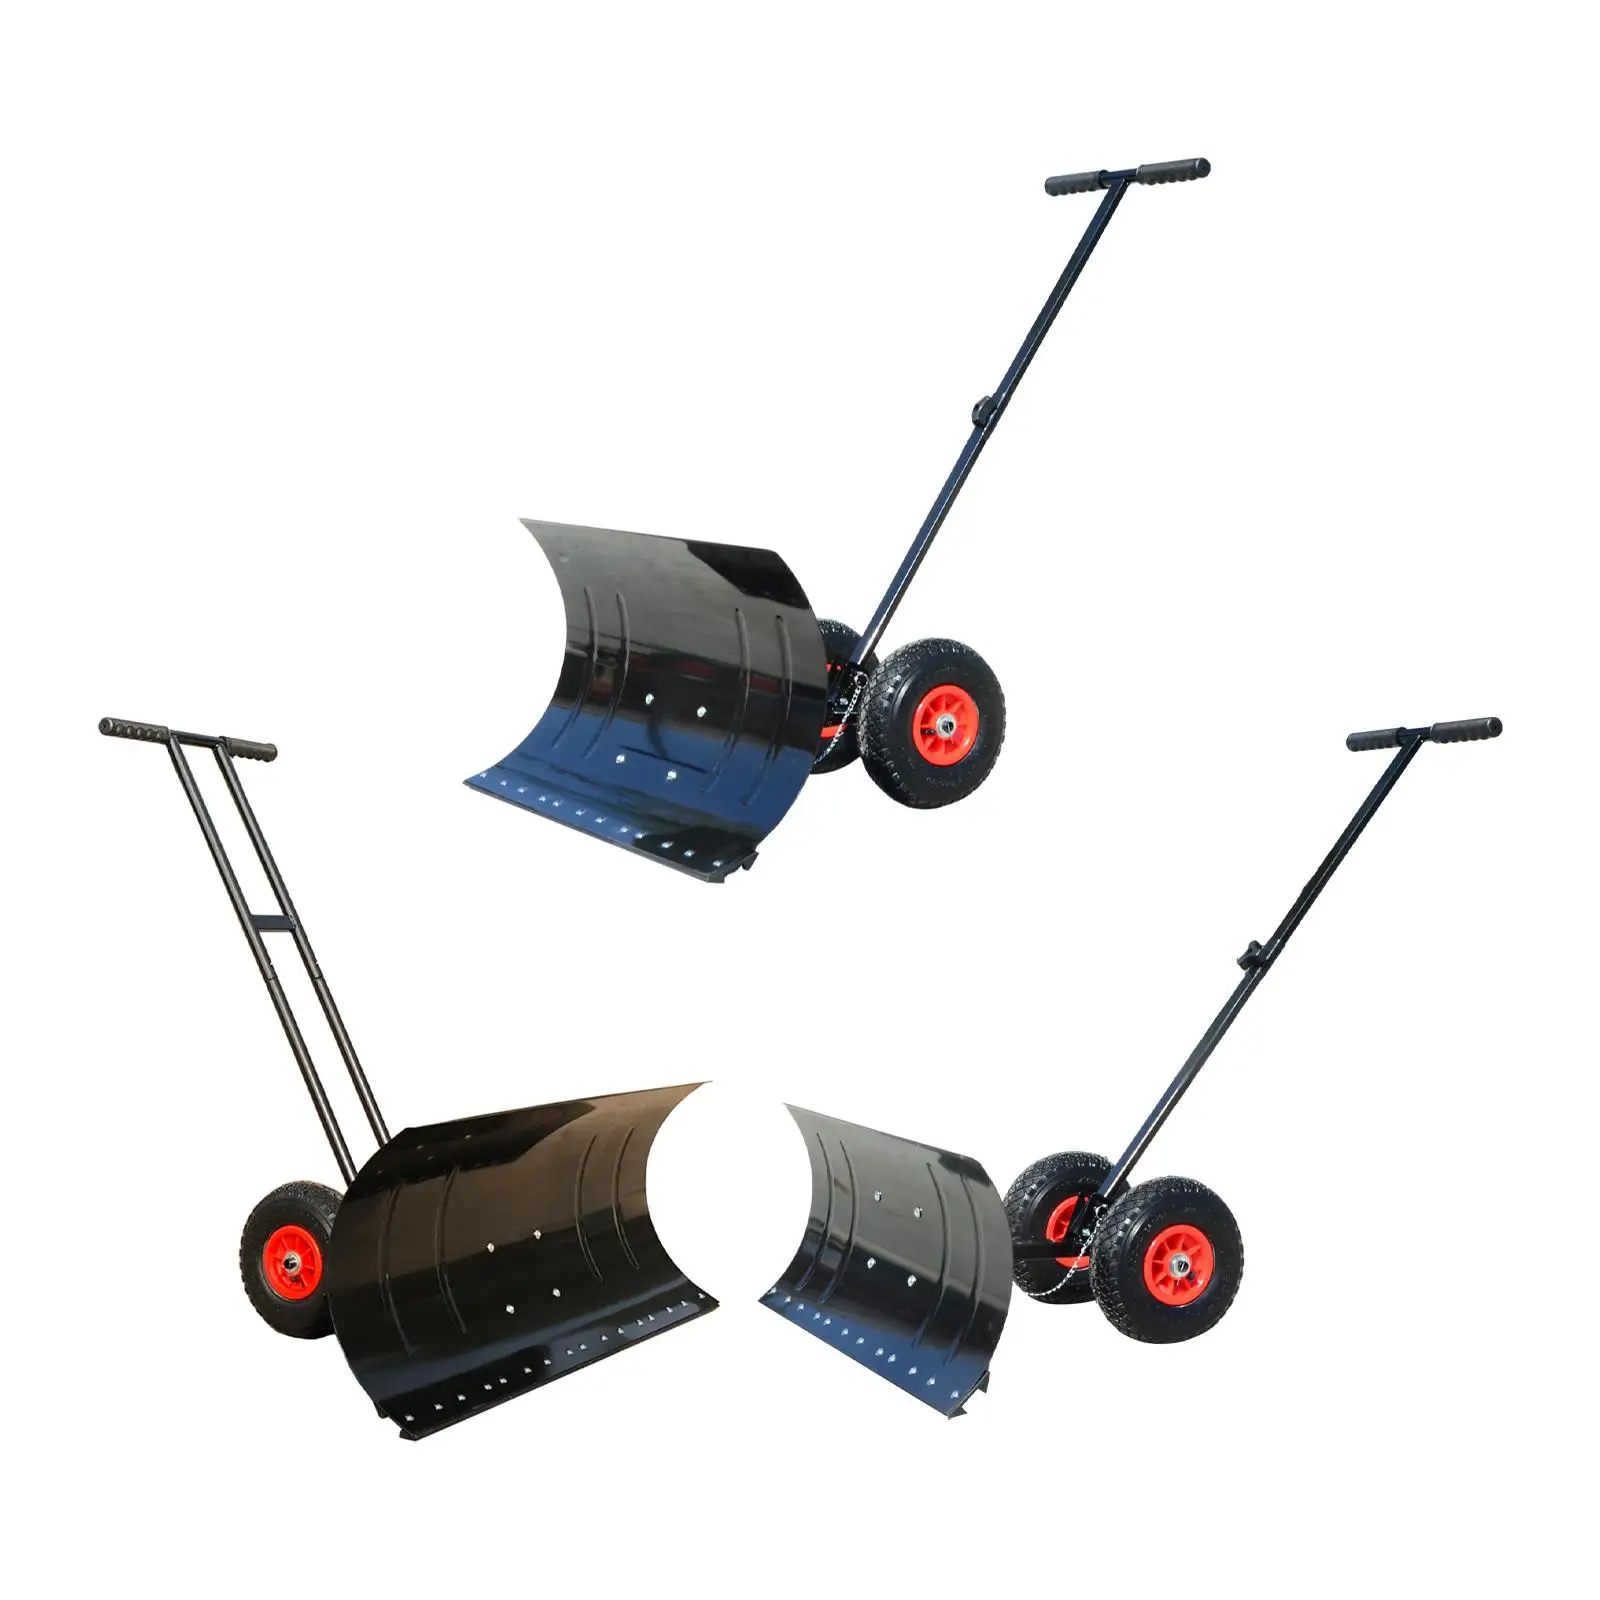 Wheeled Snow Shovel Pusher Adjustable Efficient Anti Skid Wheels Rolling Removal Tool for Deck Sidewalk Clearing Pavement Garden